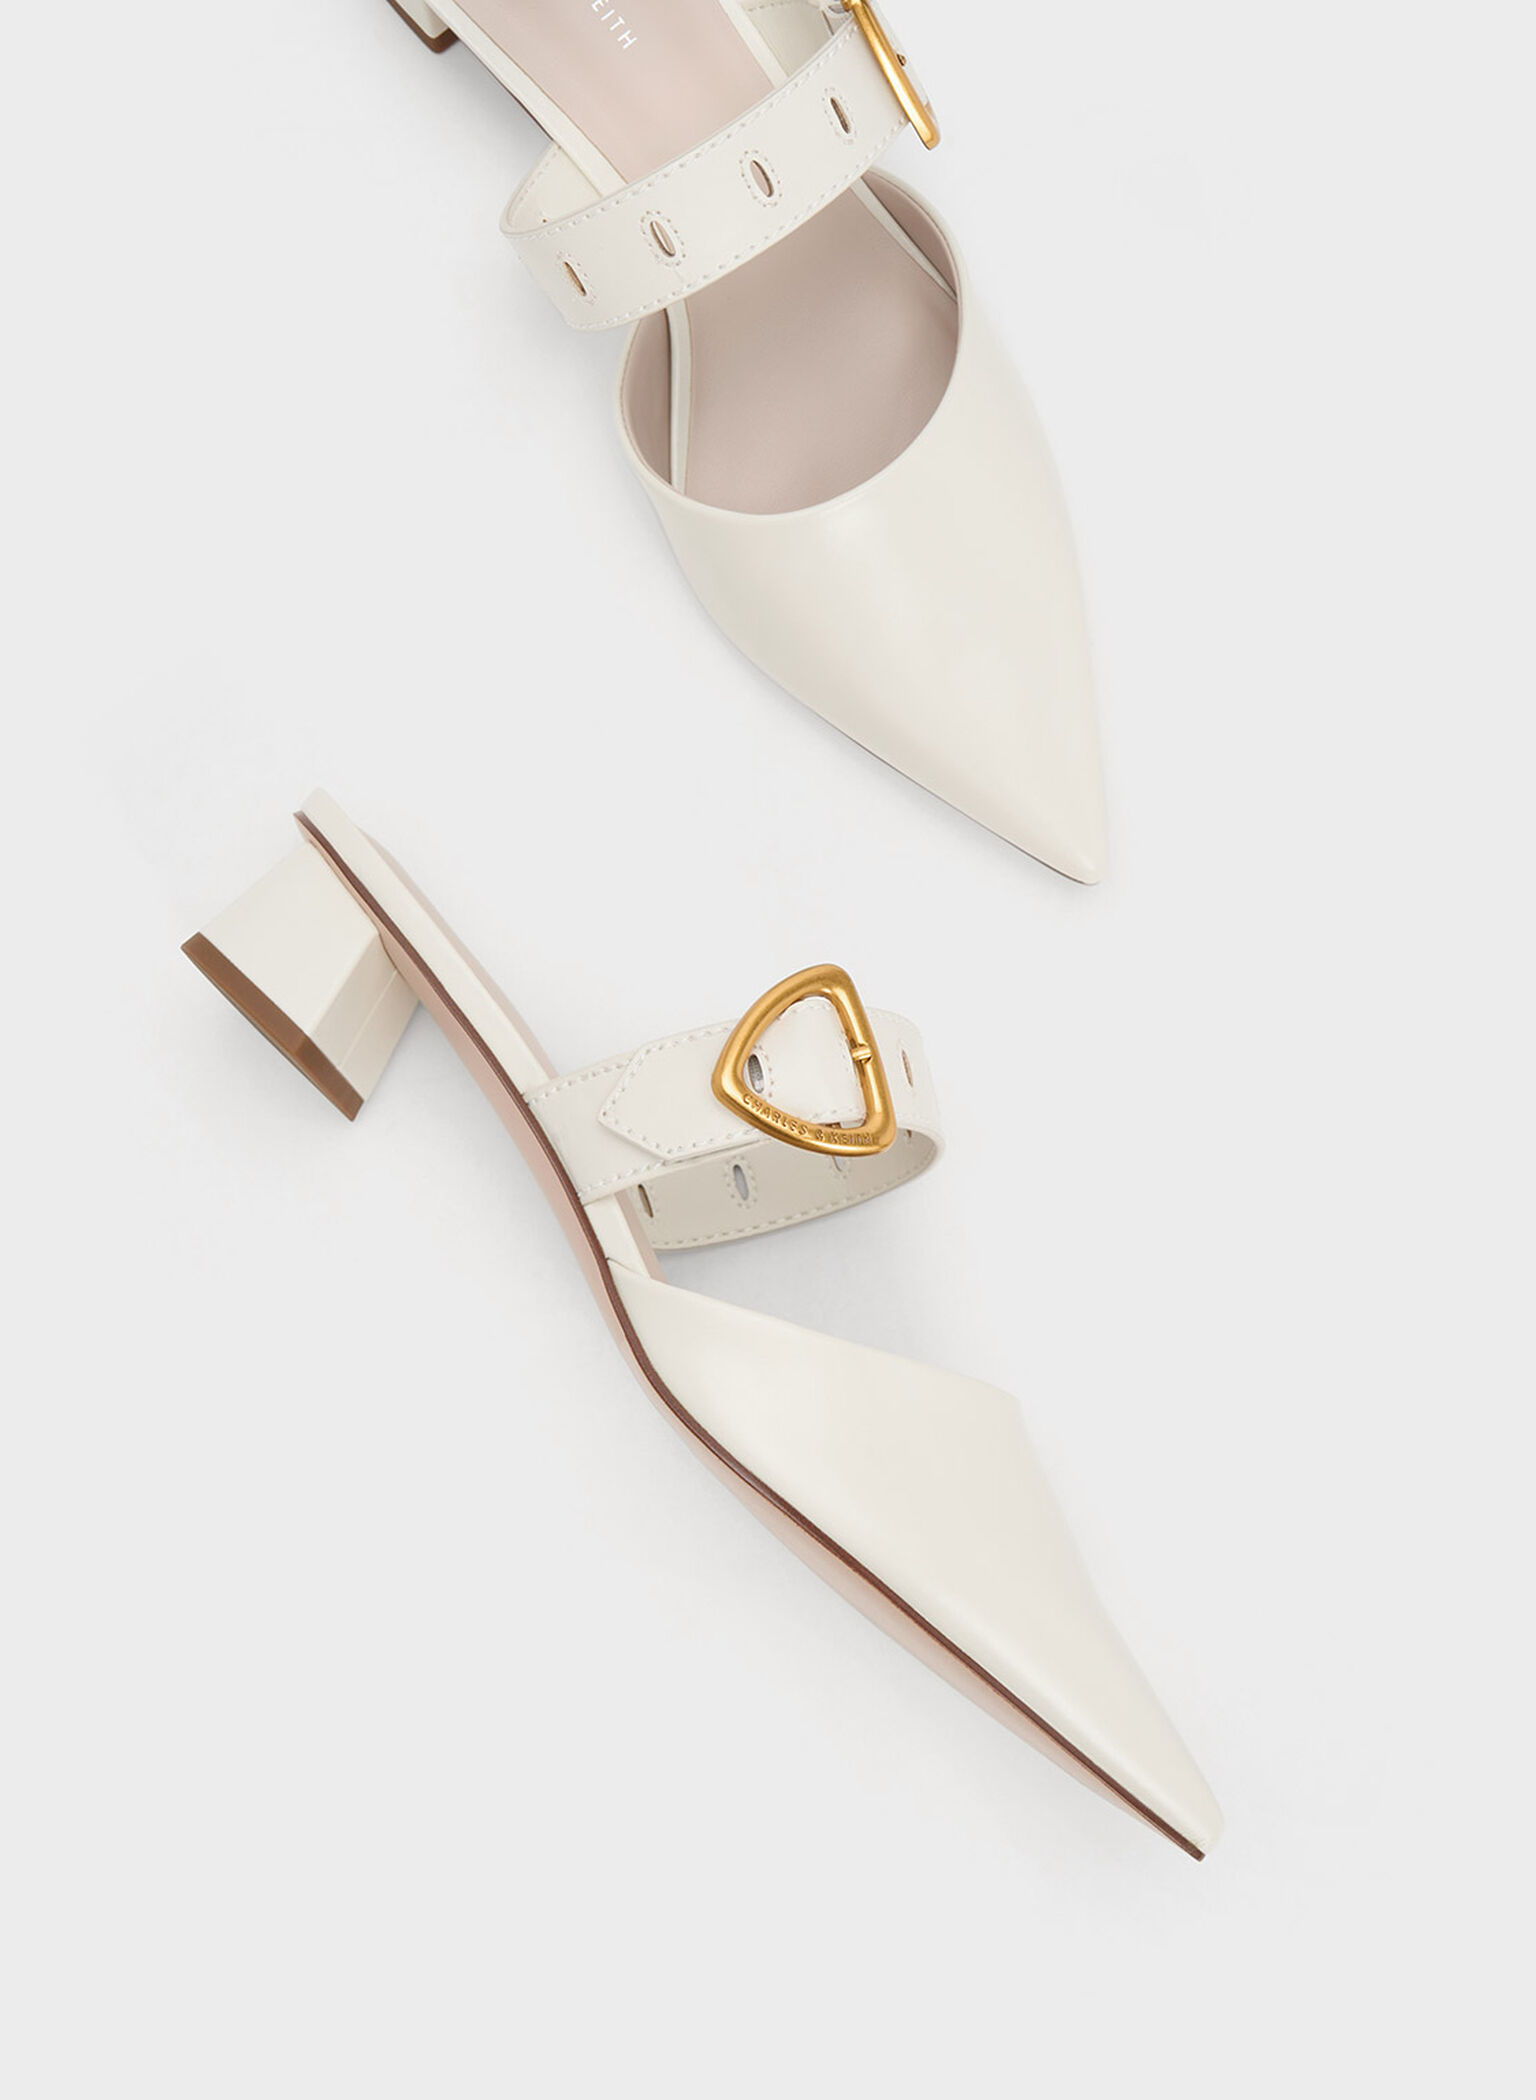 Sepphe Cut-Out Heeled Mules, Cream, hi-res